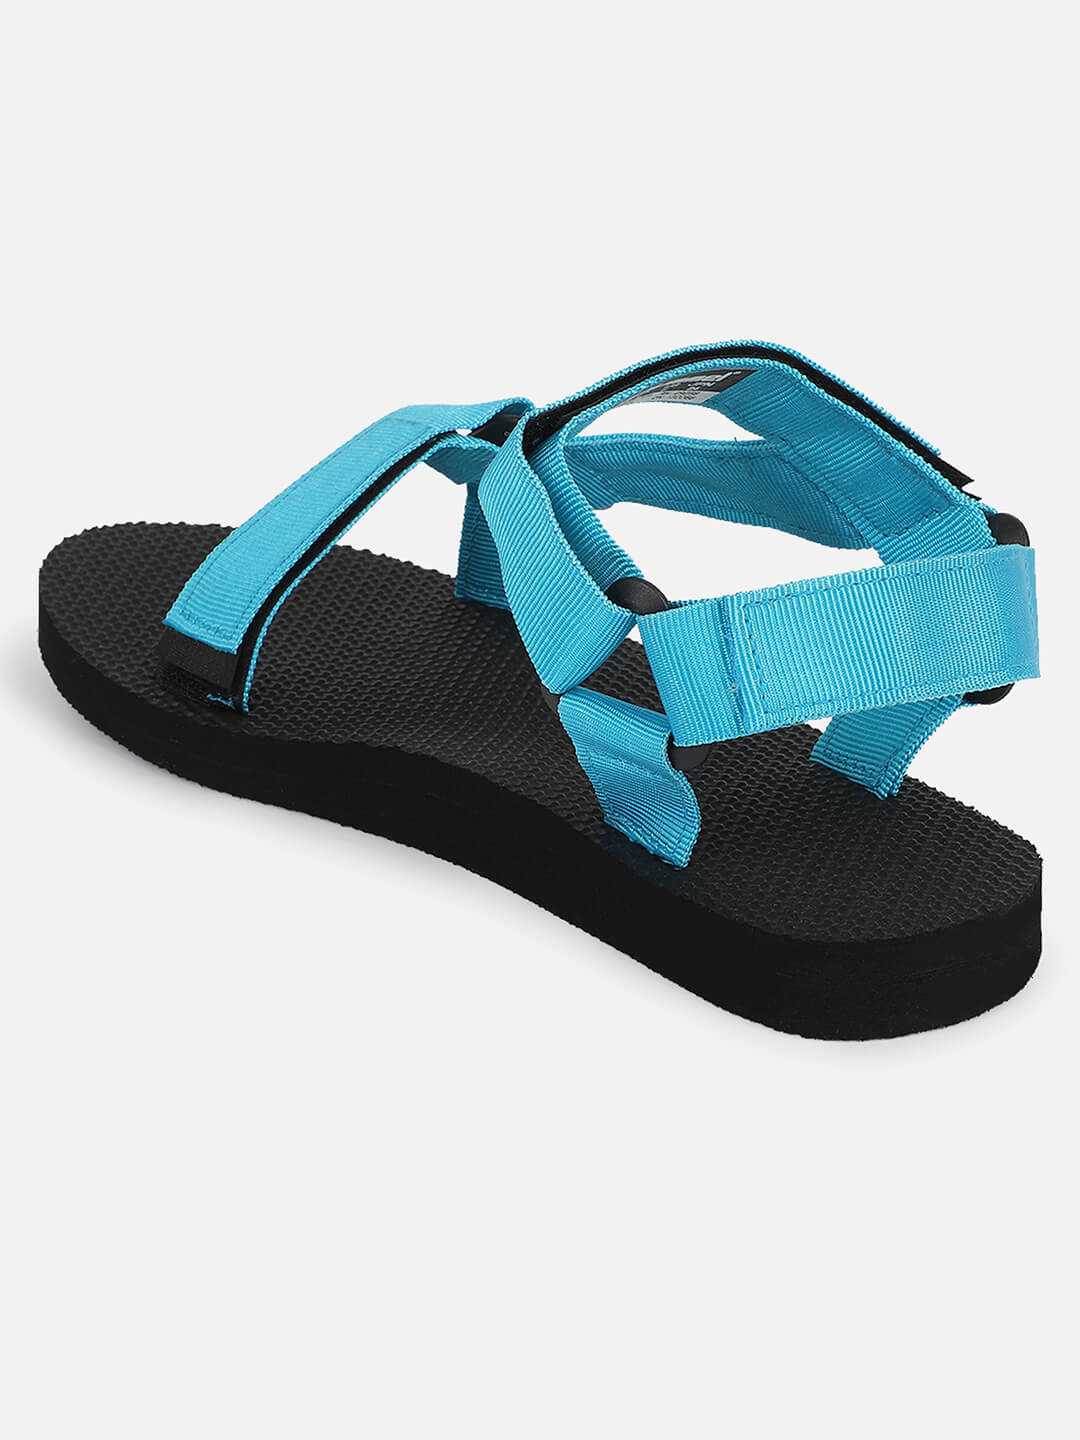 Flip-Flops Are Like the New Dress - Blue and Black or White and Gold  Illusion